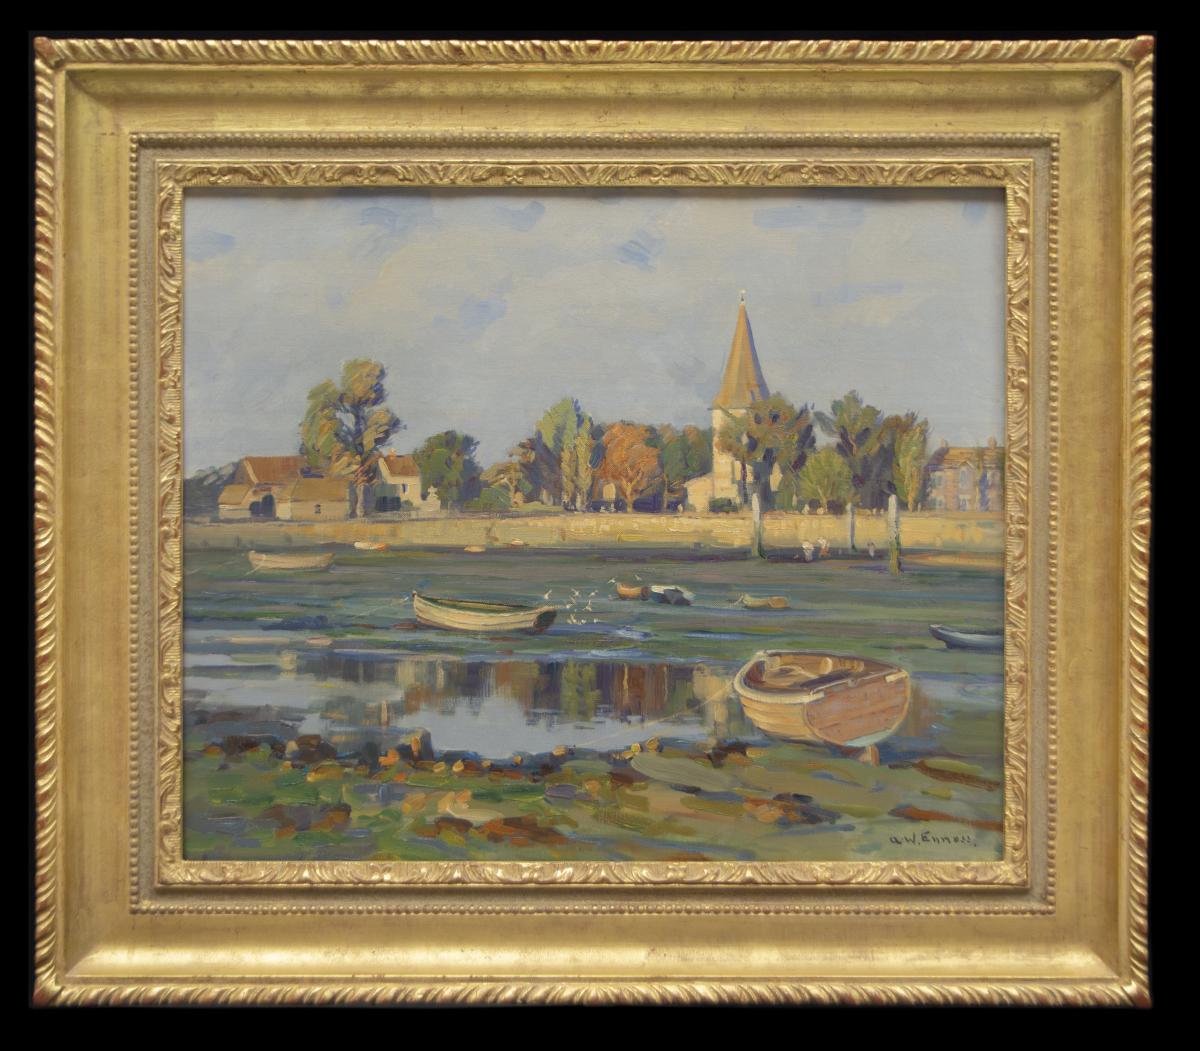 Old Bosham Harbour - Low Tide by Augustus William Enness (1876 - 1948)